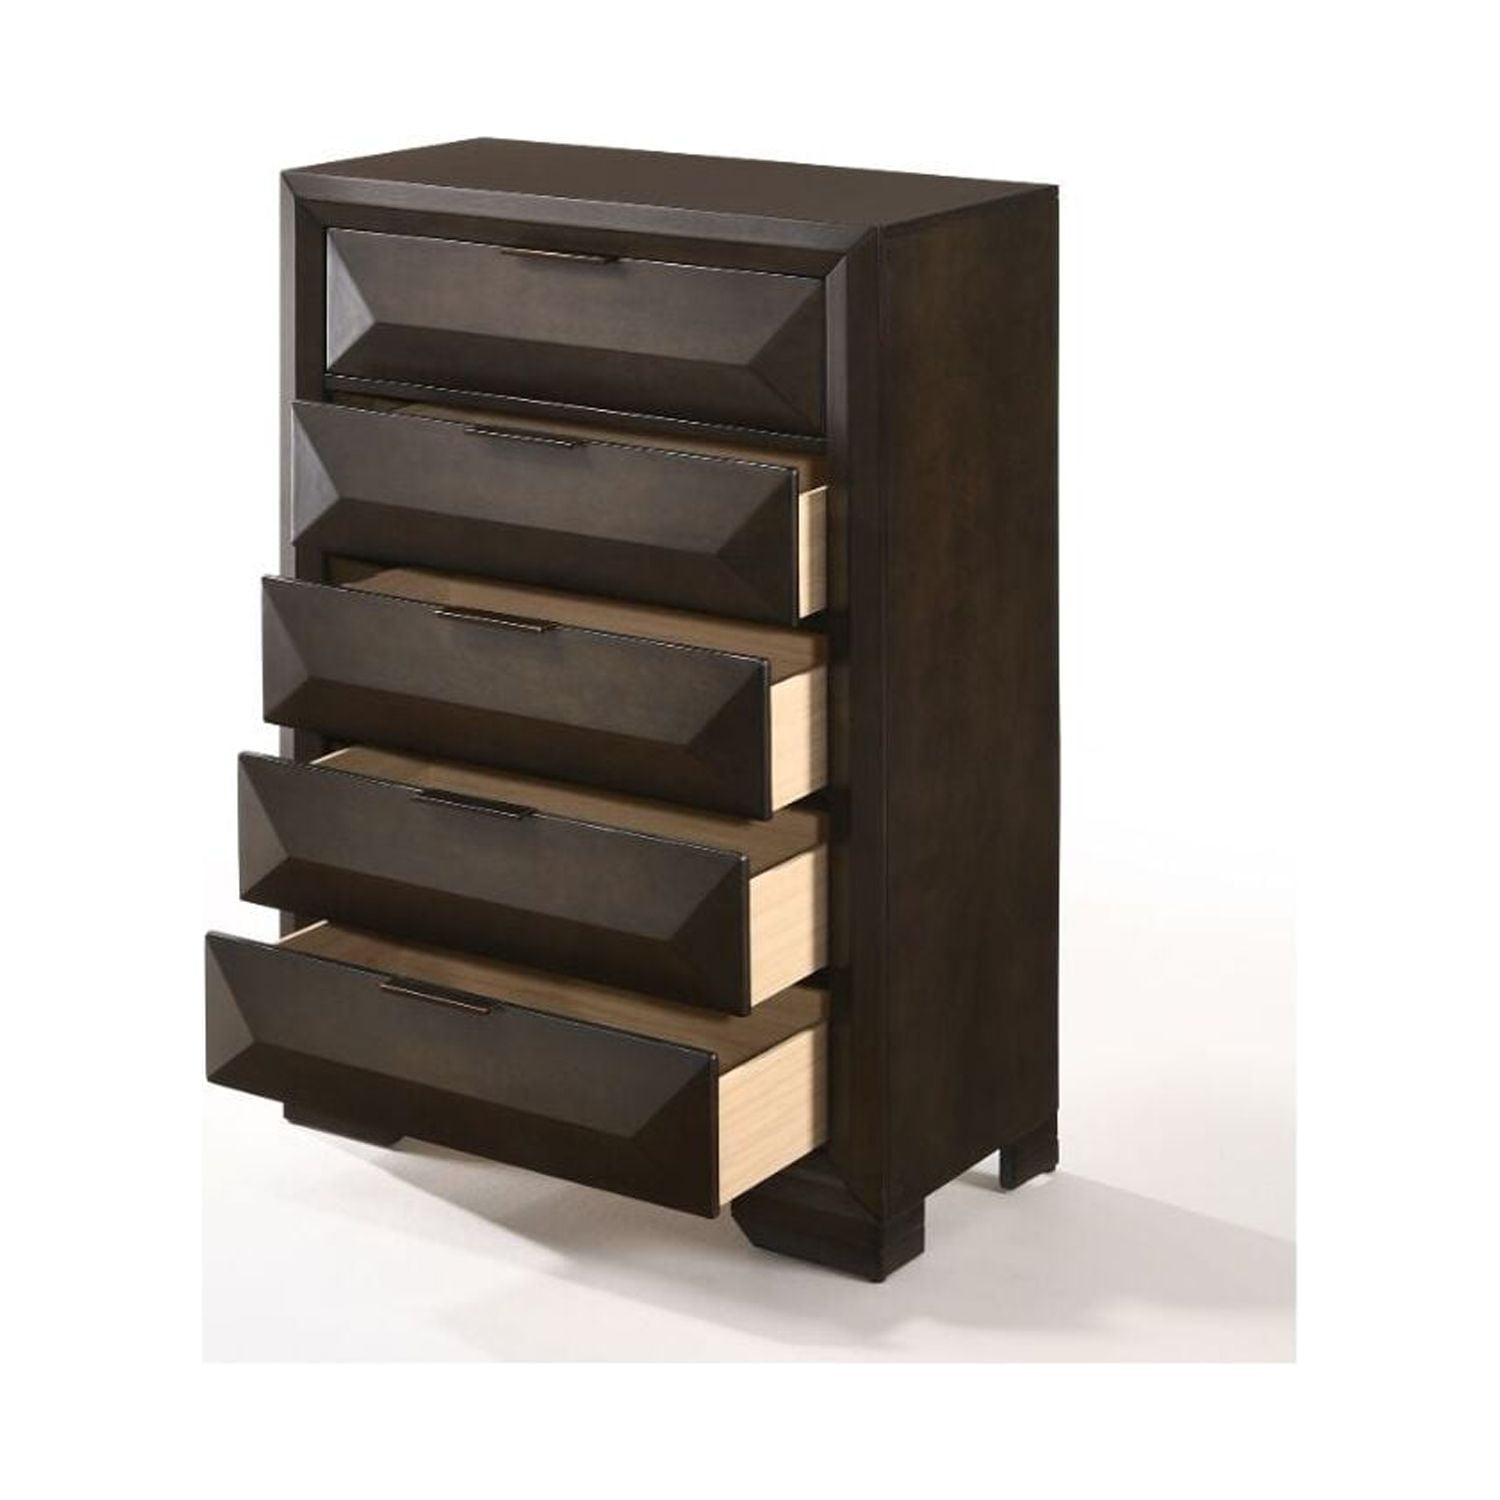 Picture of ACME 22876 Merveille Chest - Espresso - 51 x 34 x 17 in.